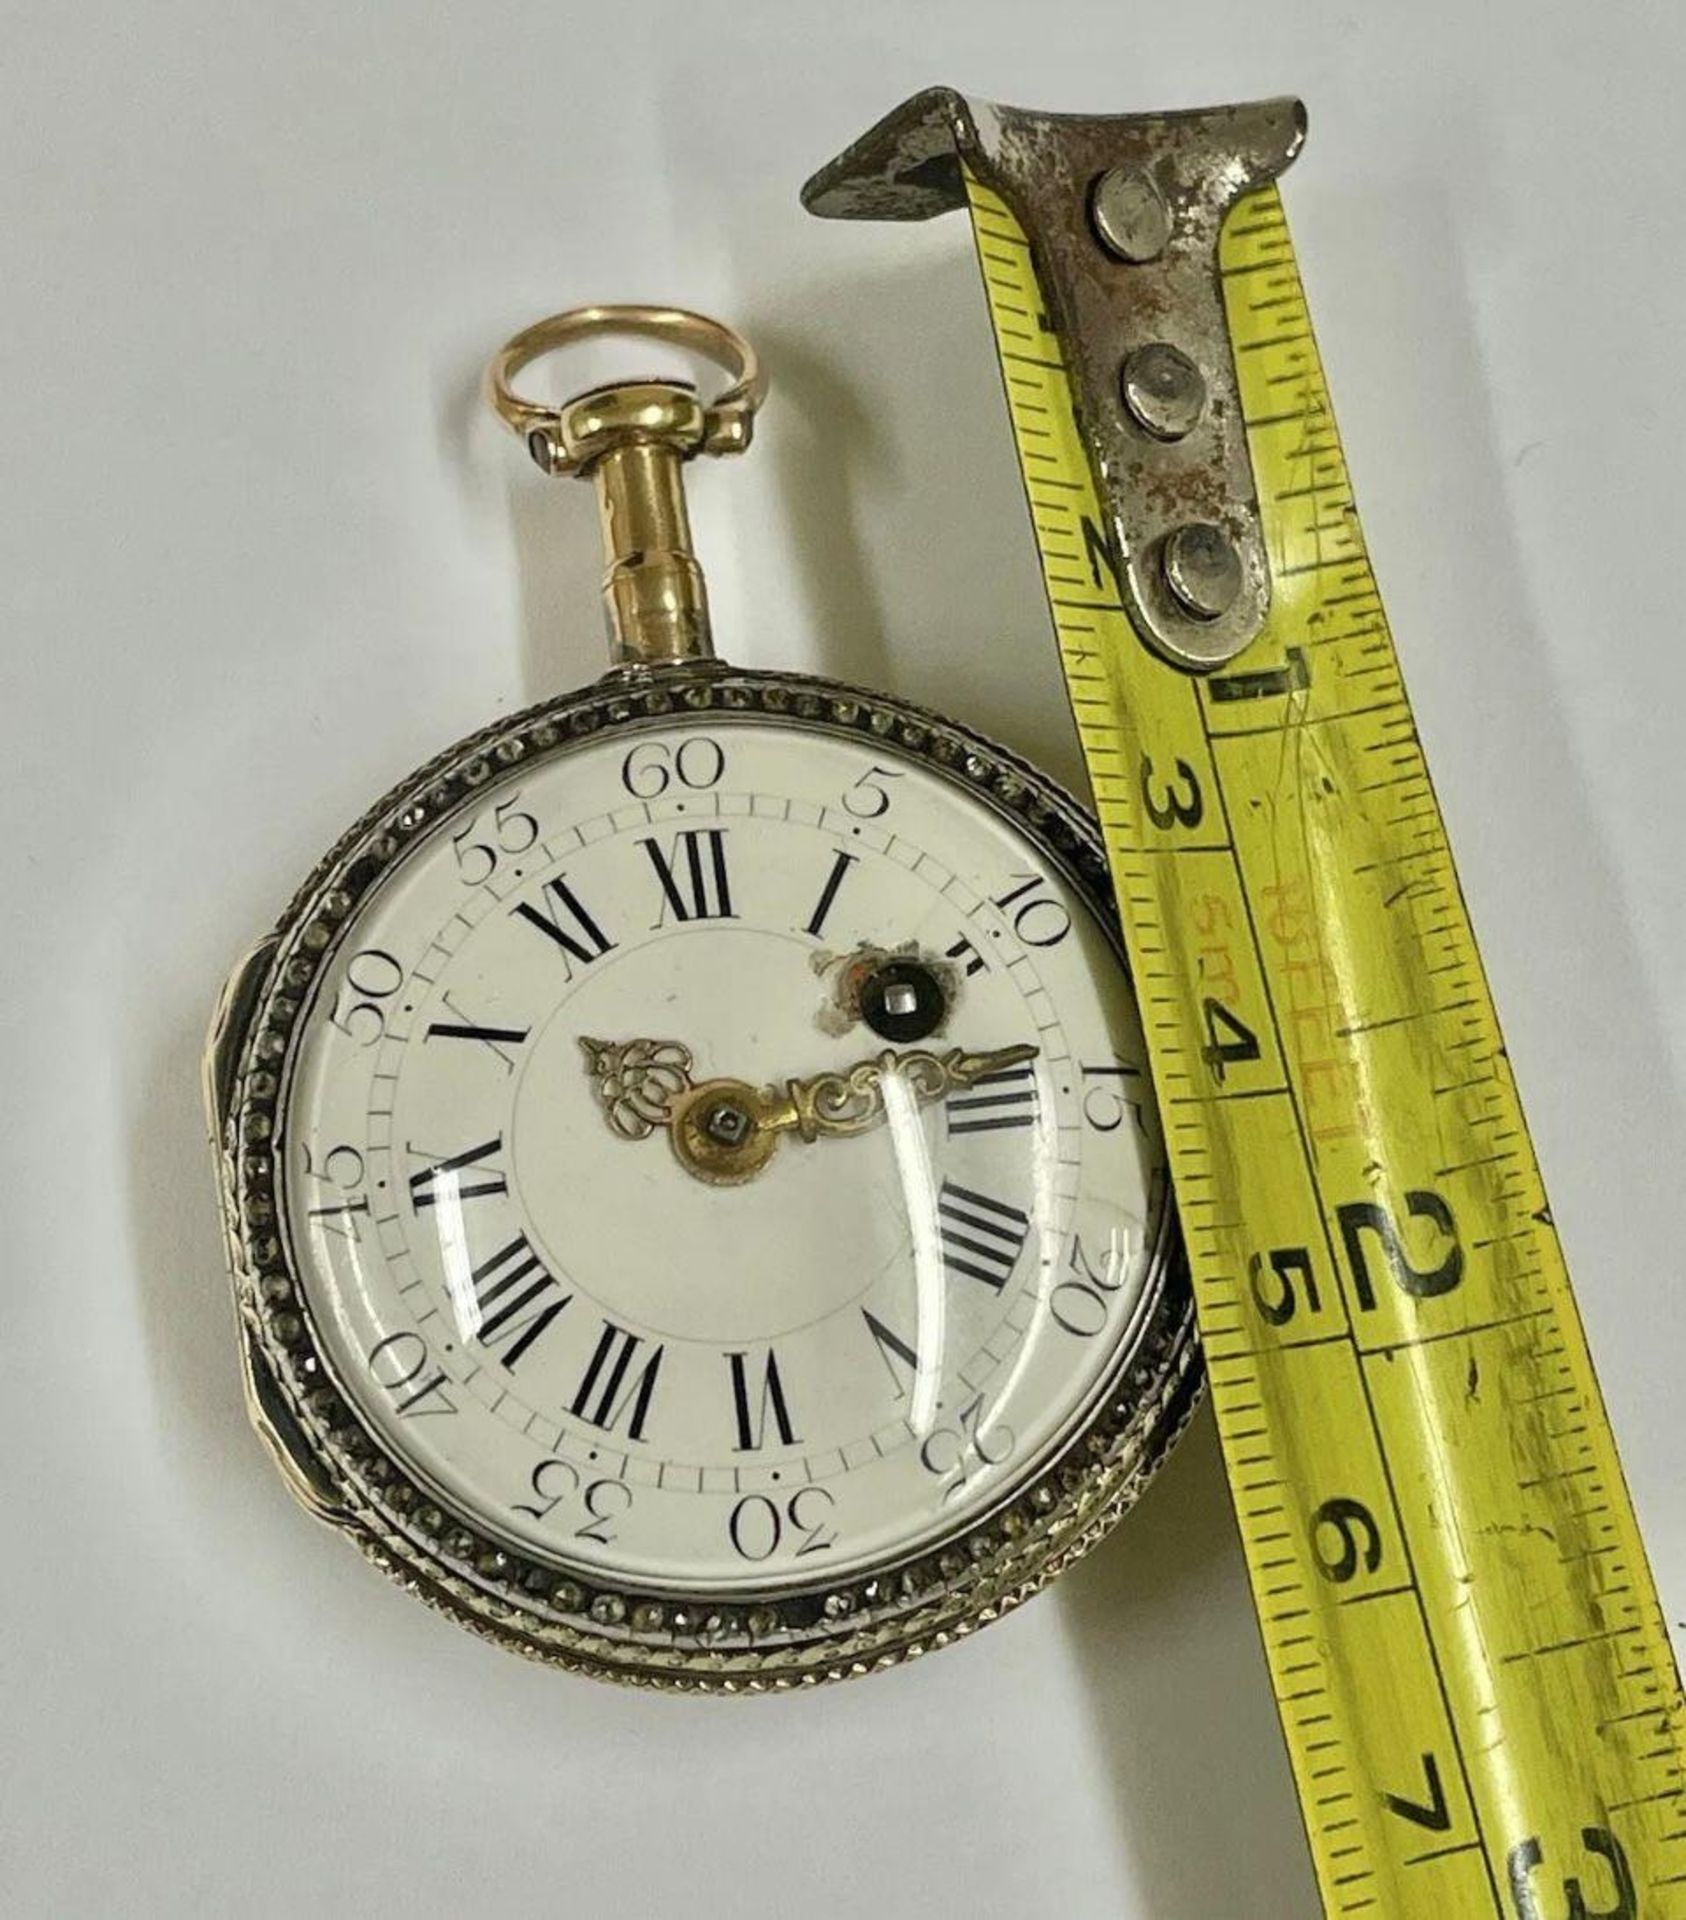 18ct gold verge fusee pocket watch , Good balance staff but wound tight needs service. - Image 6 of 6